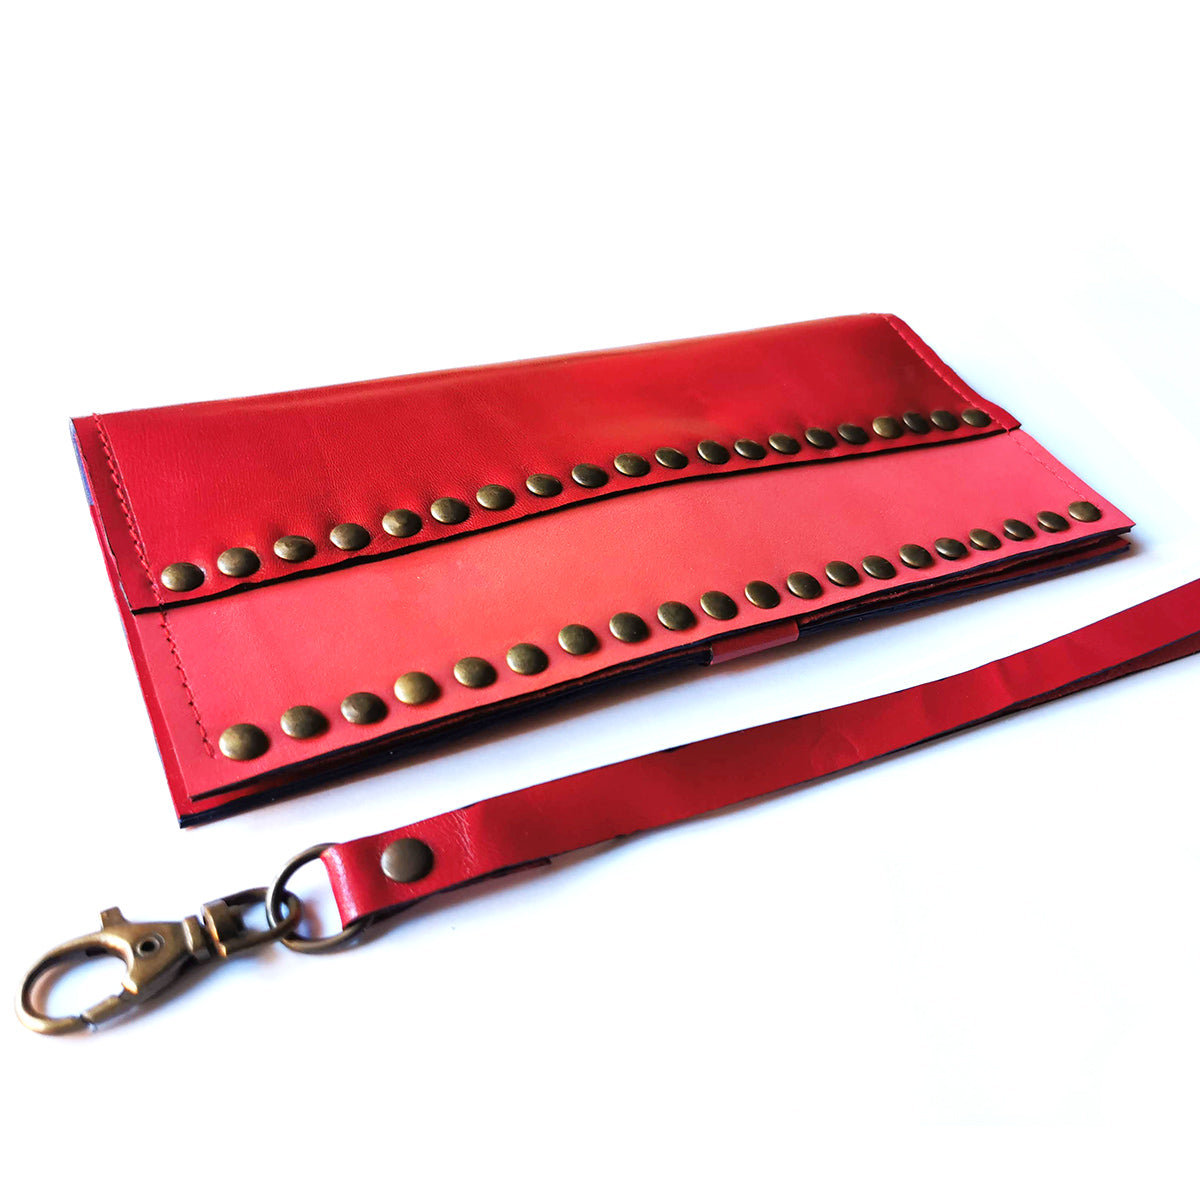 Red leather clutch wallet with studs | Narciso